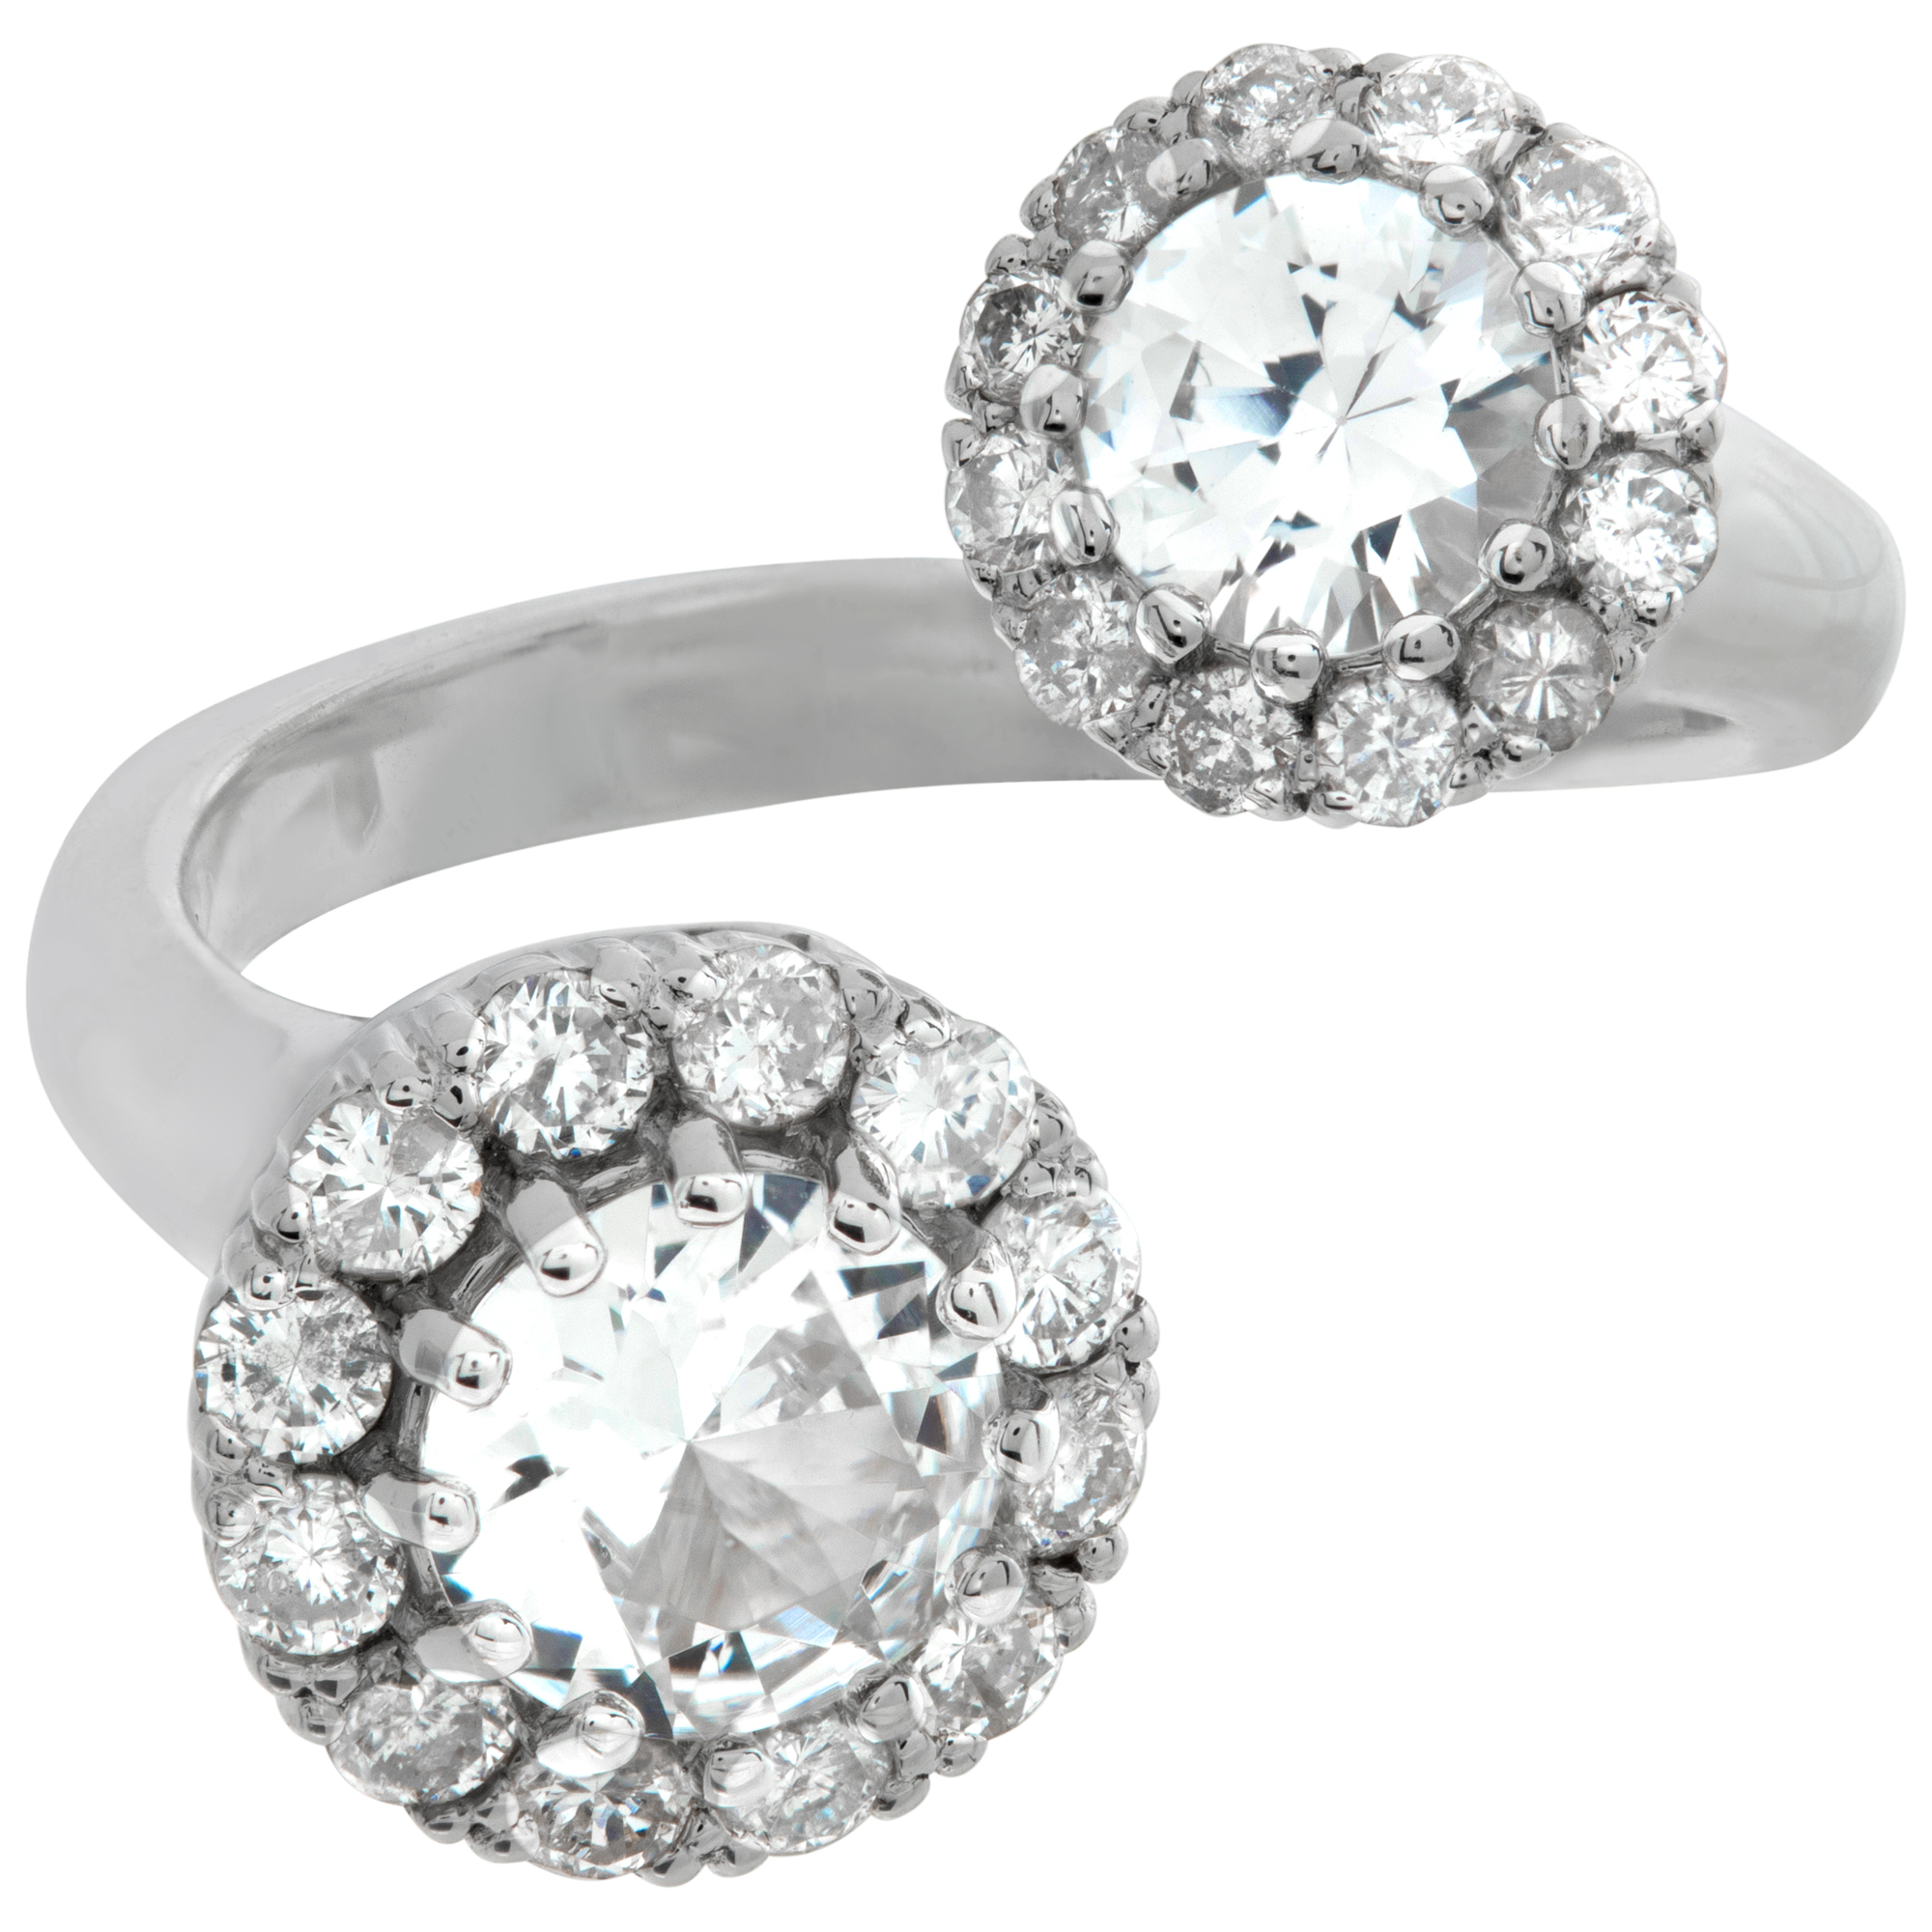 White Sapphires with Halo Diamonds set in 18k white gold. Size 5.25 image 2